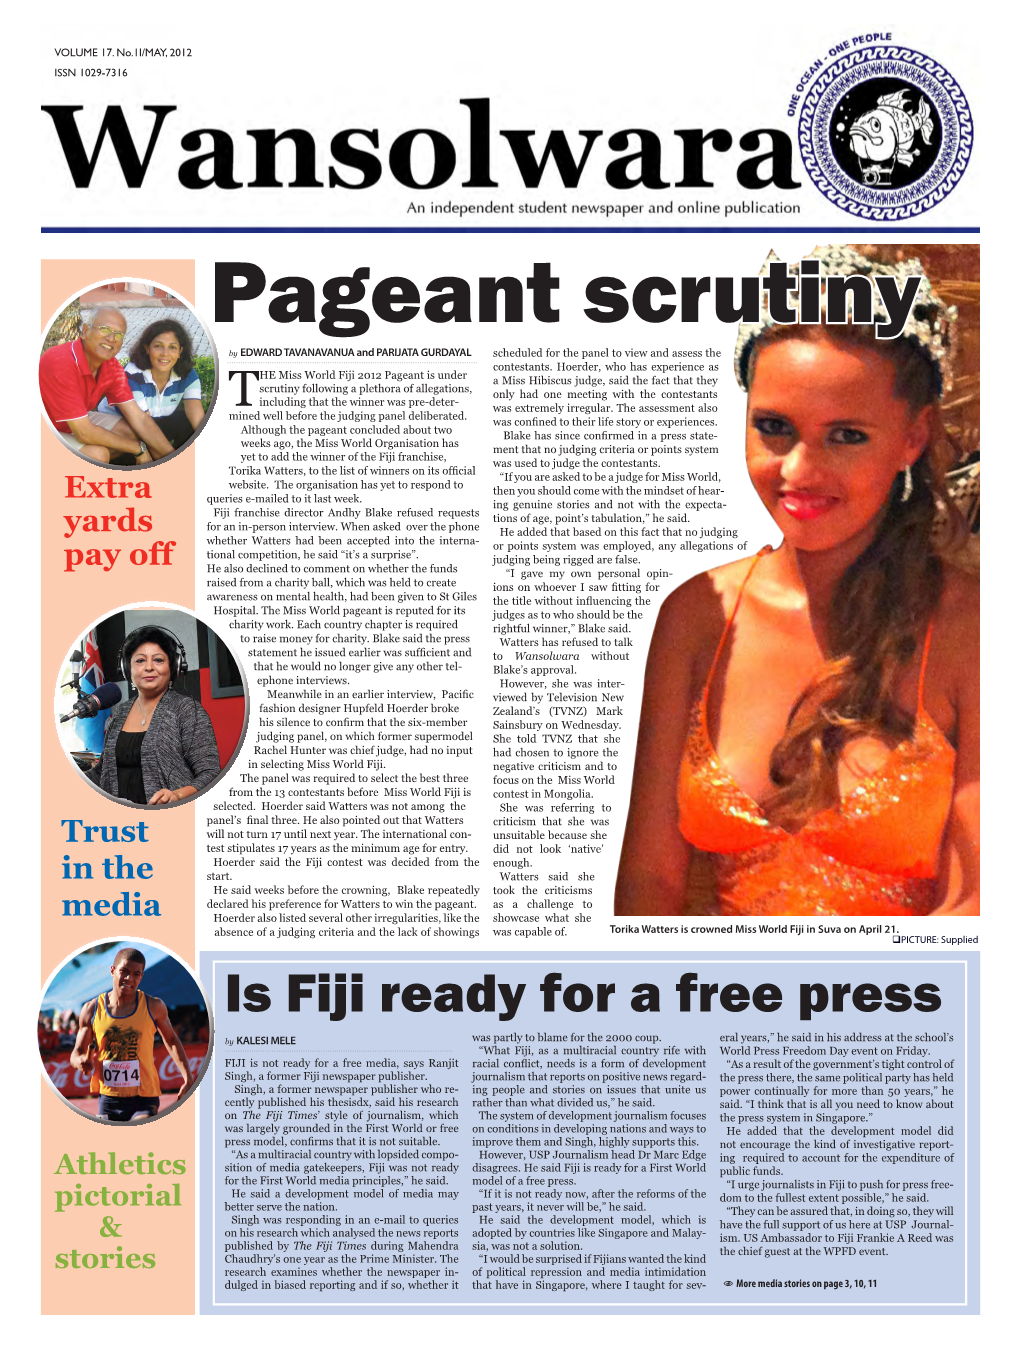 Is Fiji Ready for a Free Press